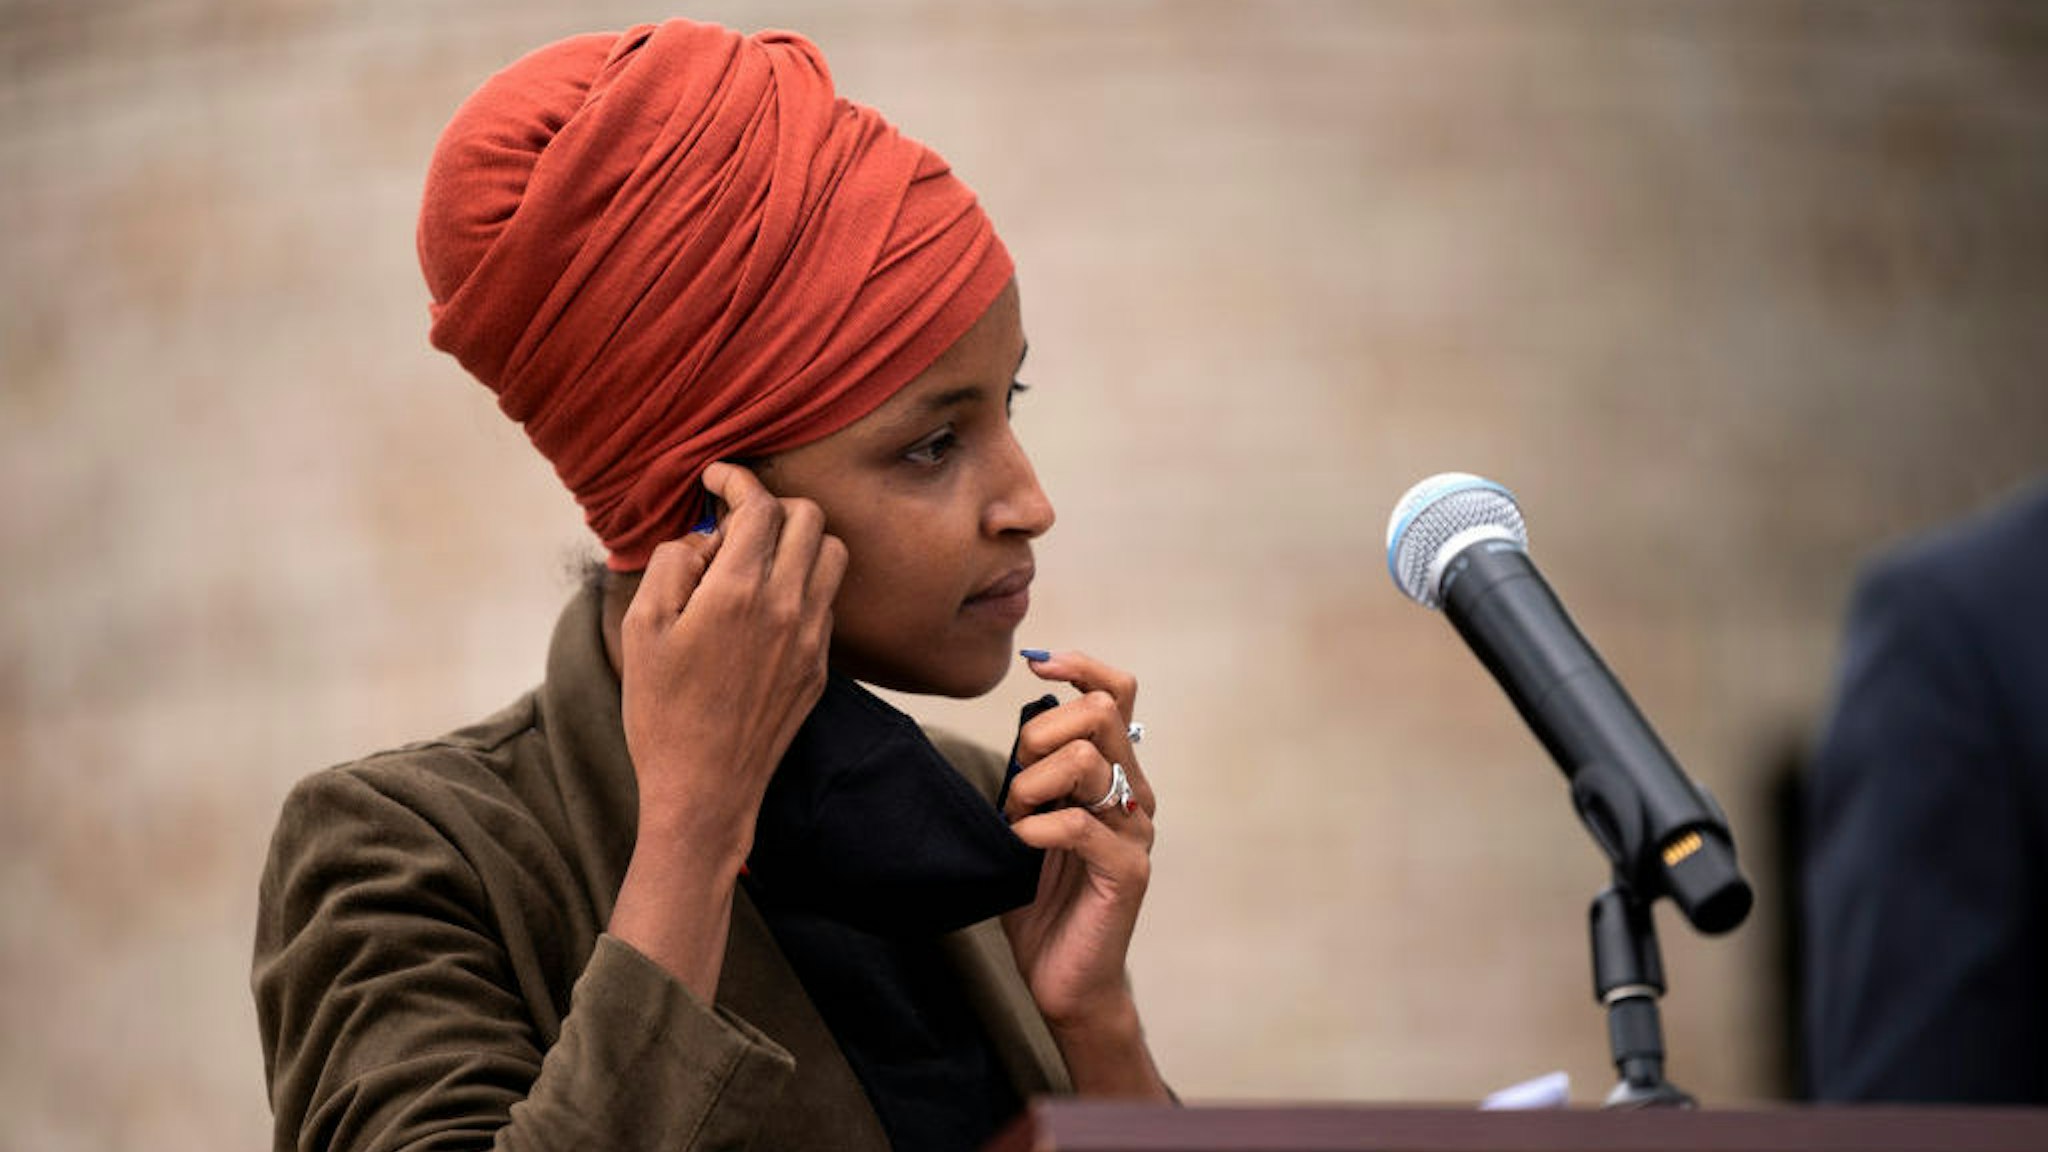 ST PAUL, MN - AUGUST 05: Rep. Ilhan Omar (D-MN) removes her mask to speak during a press conference outside the DFL Headquarters on August 5, 2020 in St Paul, Minnesota. Omar is hoping to retain her seat as the representative for Minnesota's 5th Congressional District in next week's primary election. (Photo by Stephen Maturen/Getty Images)